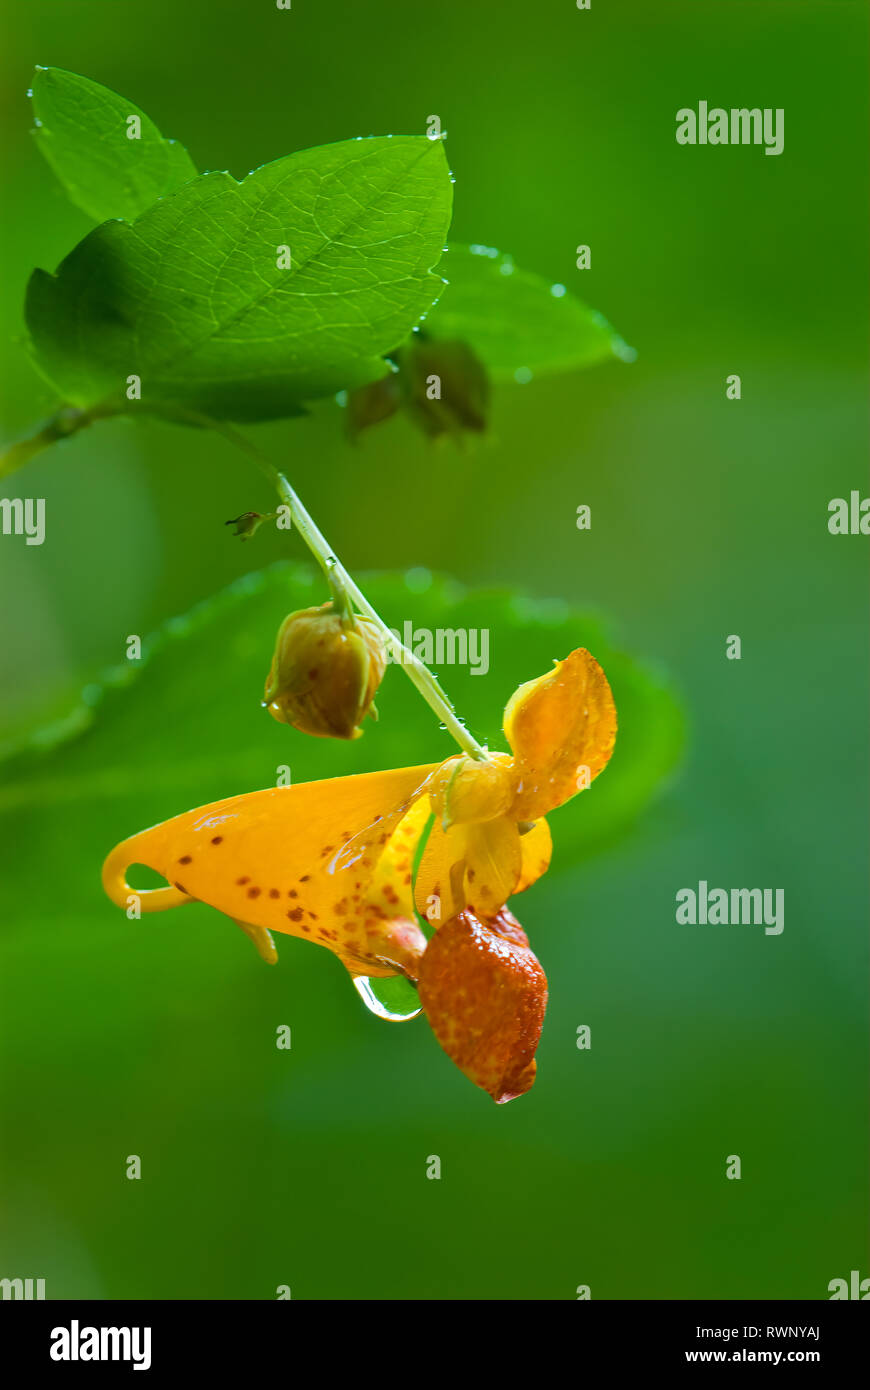 Flower and flower bud of common jewelweed (Impatiens capensis), also called orange jewelweed, touch-me-not, spotted jewelweed, and orange balsam. A he Stock Photo